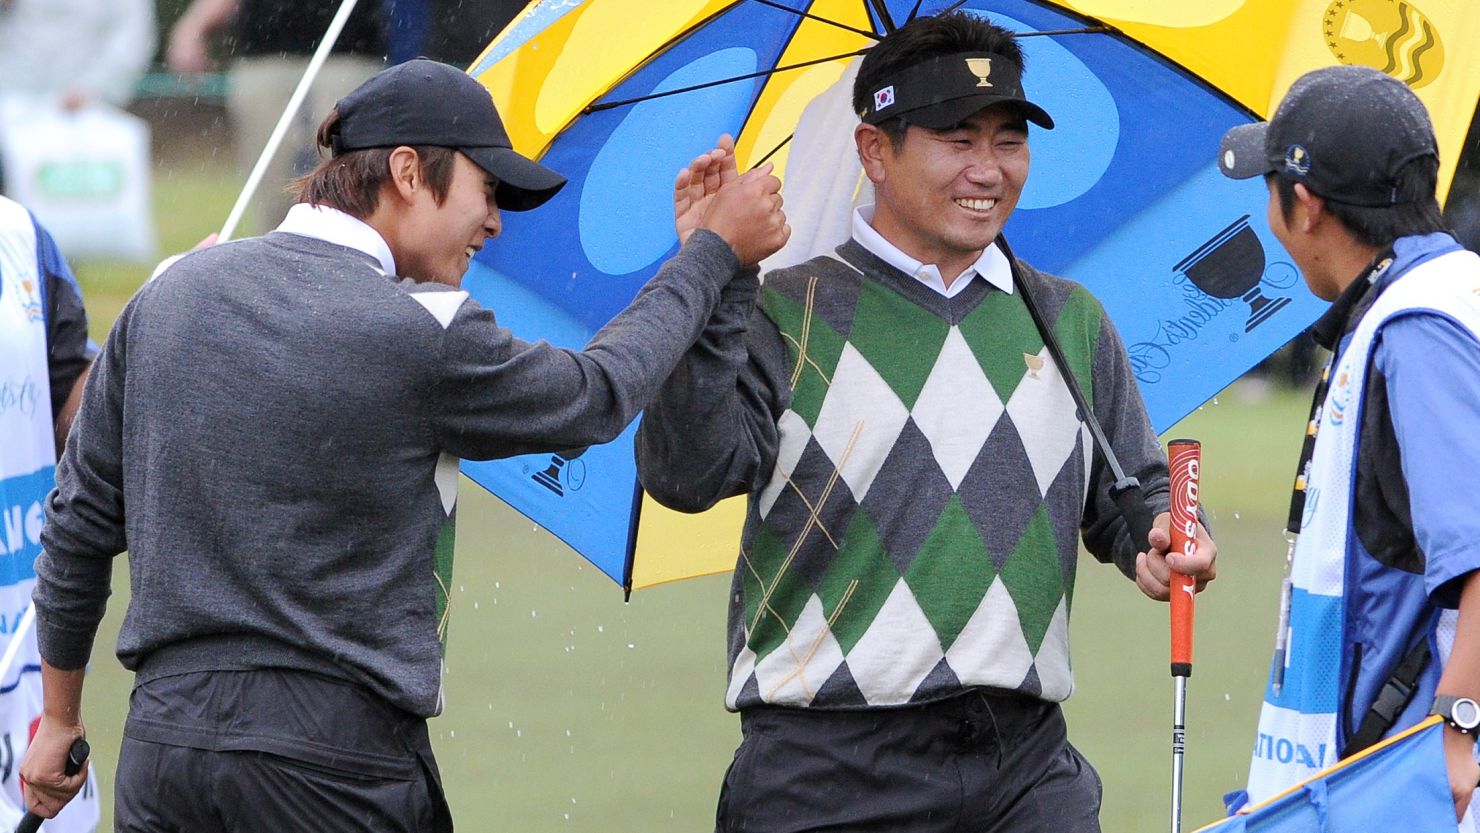 International team players K.T. Kim, left, and Y.E. Yang celebrate after beating Dustin Johnson and Tiger Woods on Saturday.